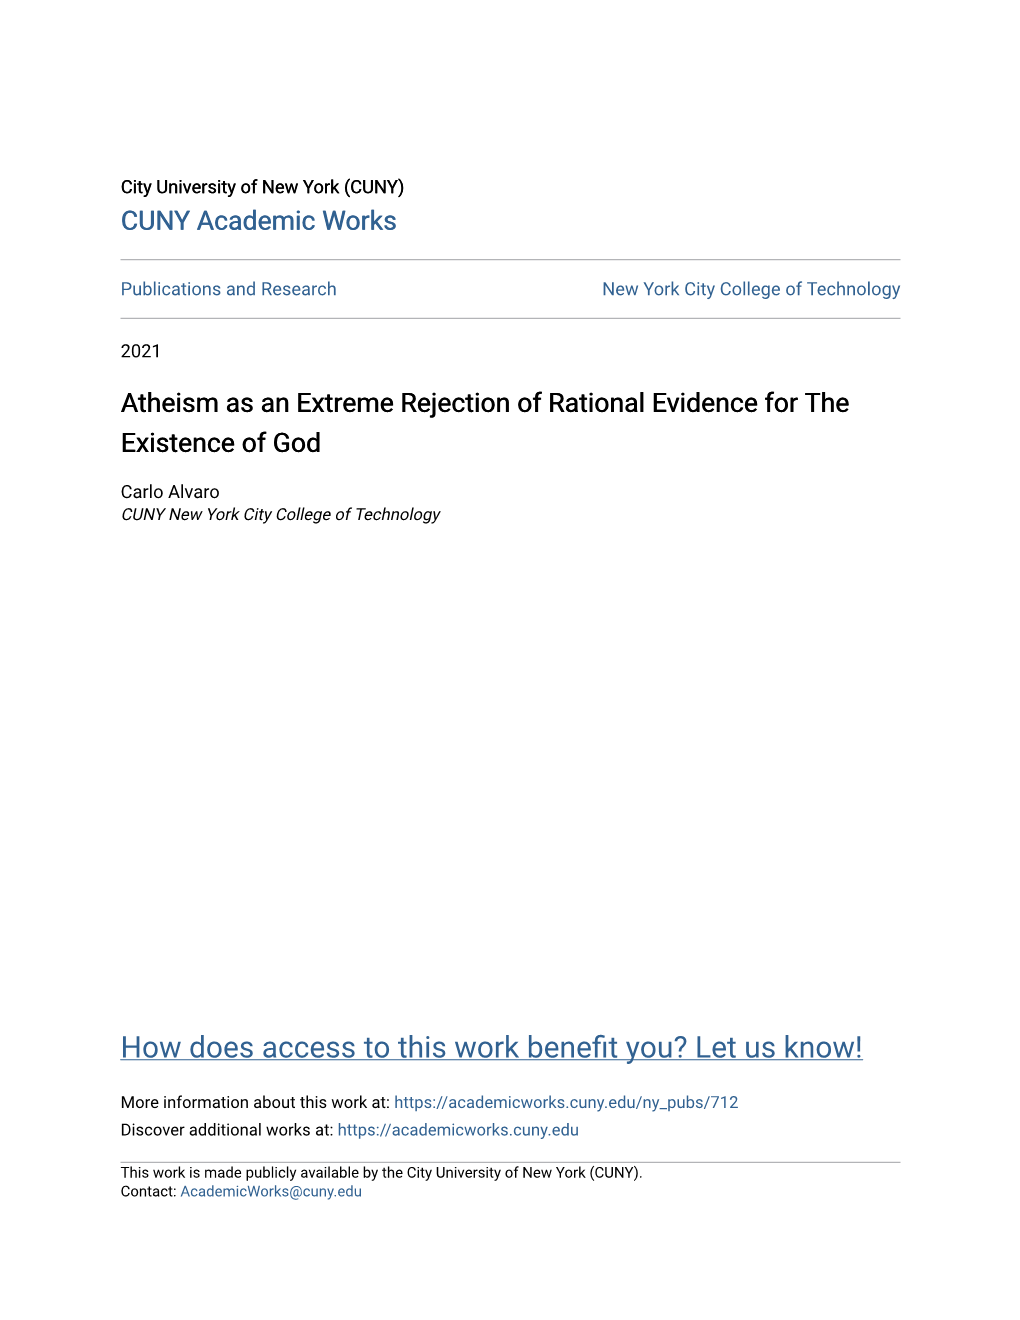 Atheism As an Extreme Rejection of Rational Evidence for the Existence of God